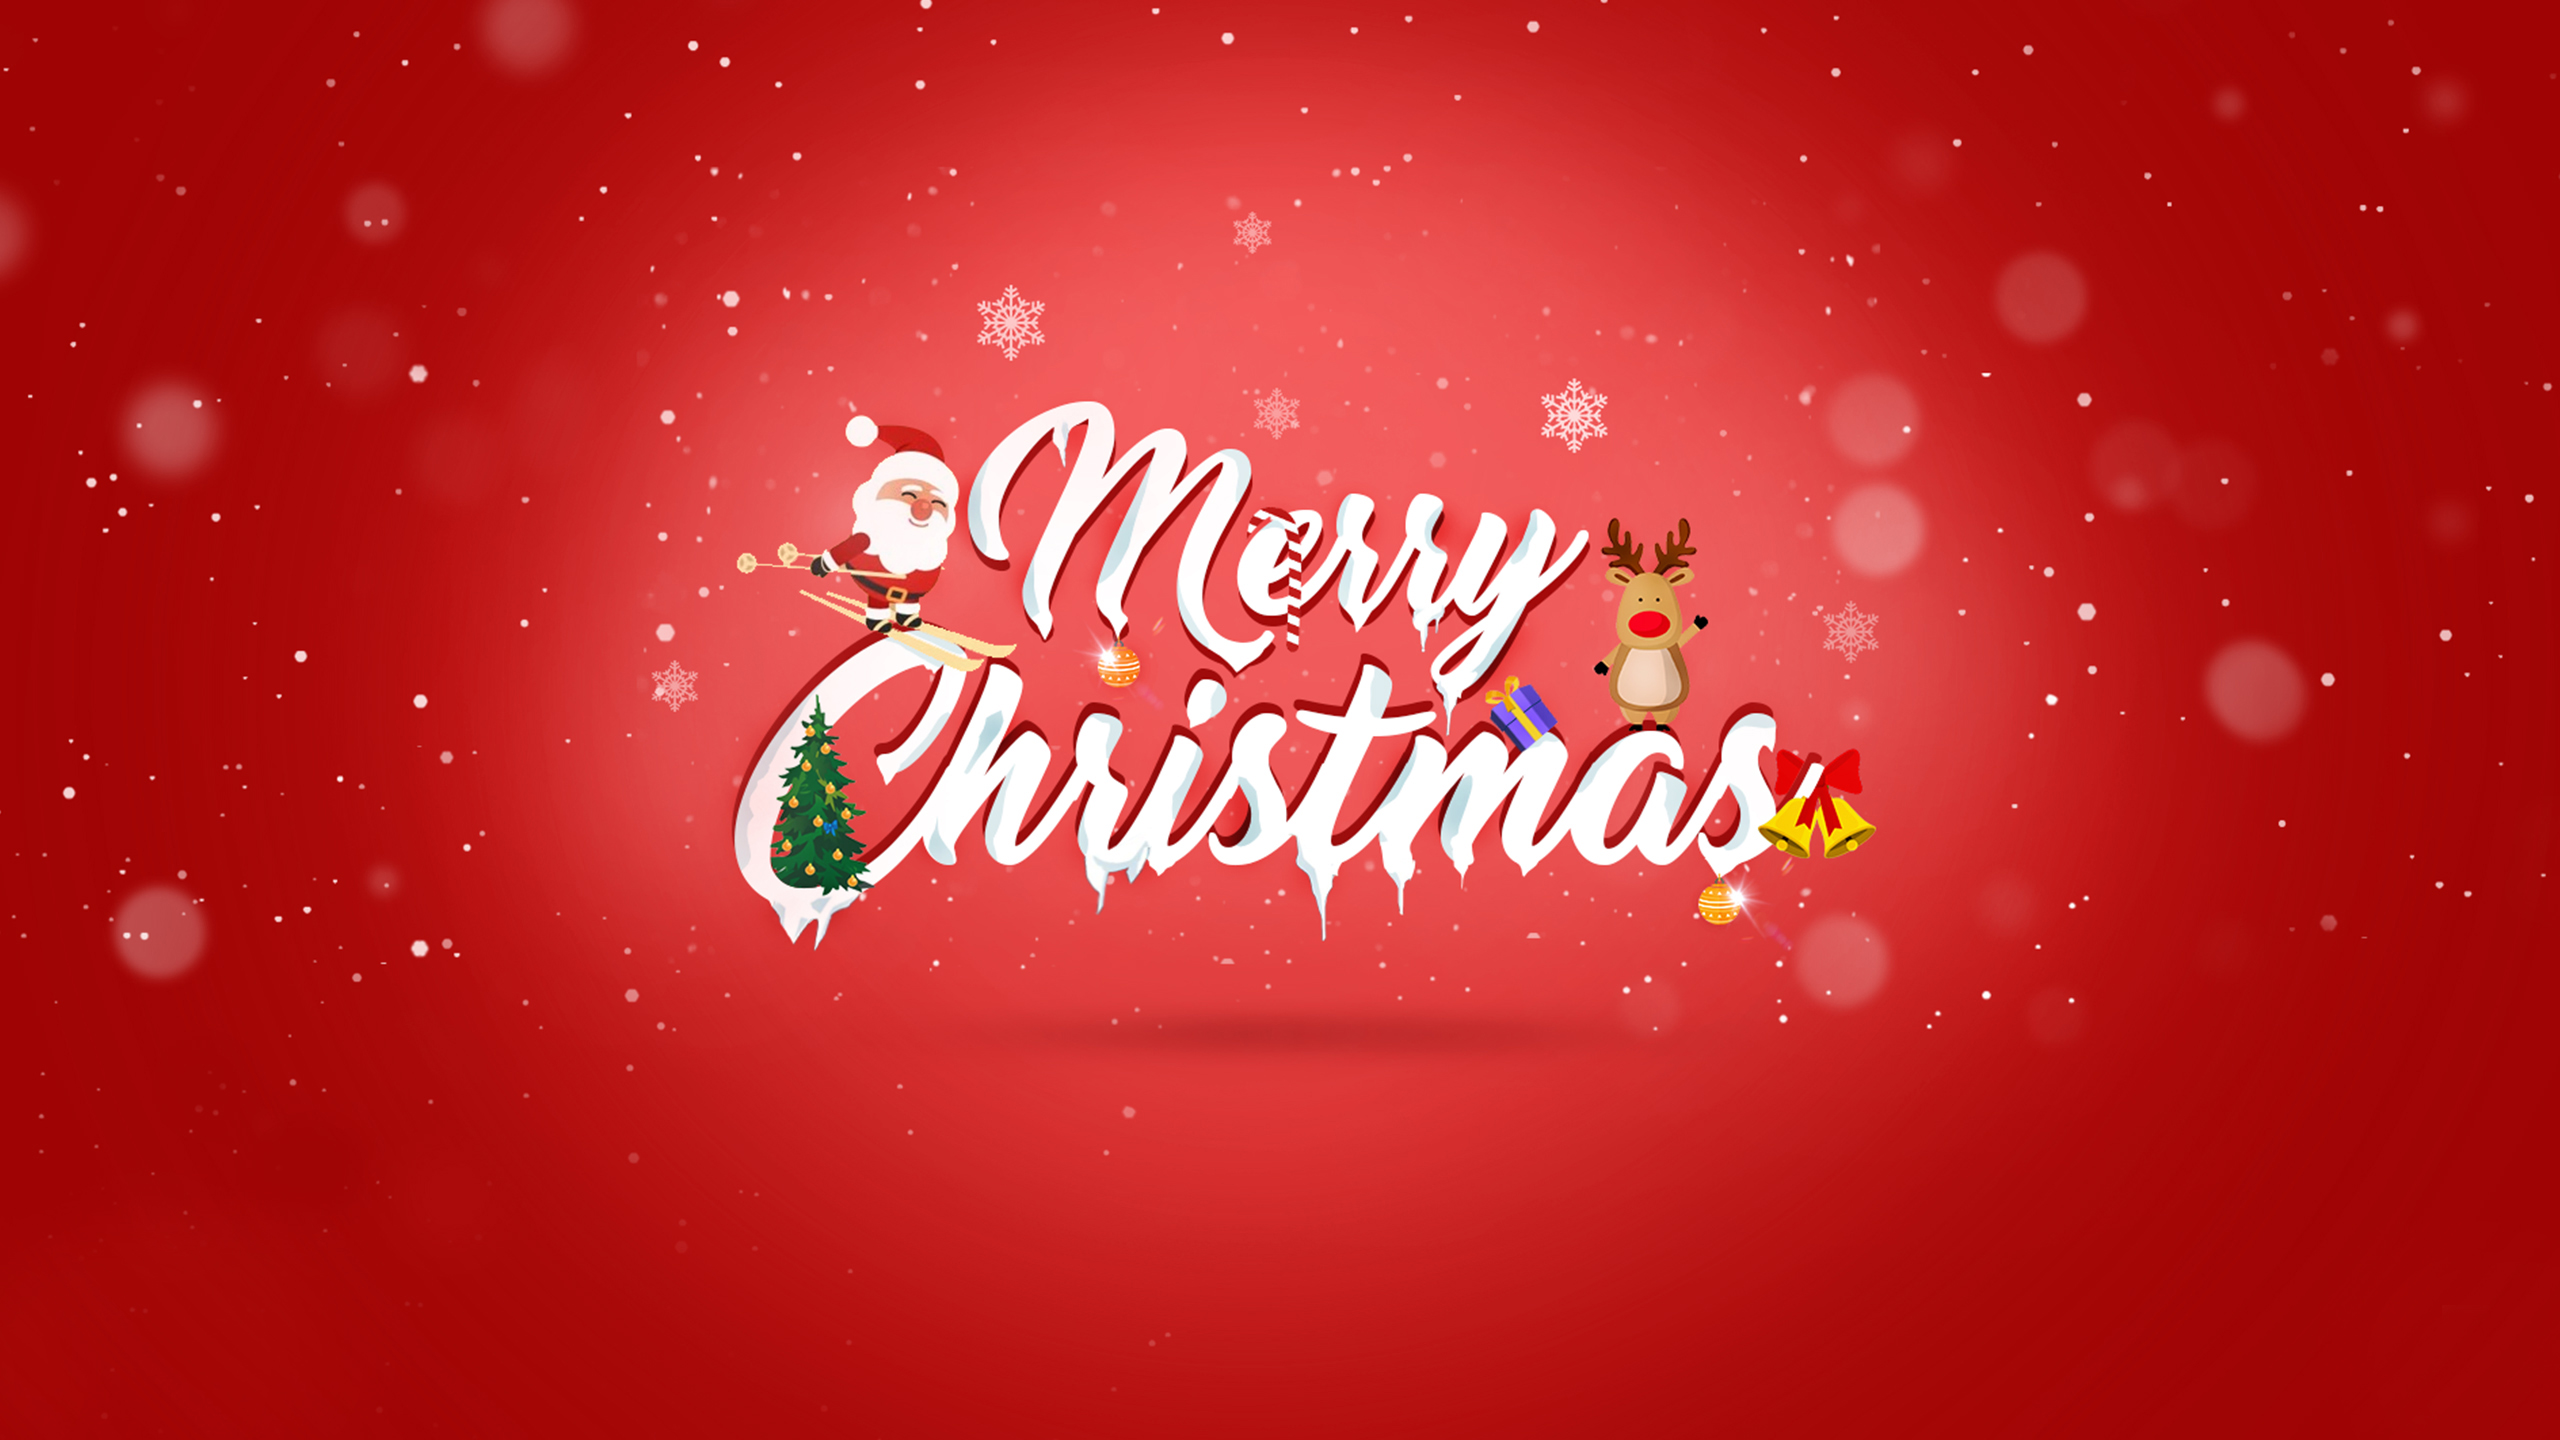 Download Top 10 best merry Christmas HD wallpapers - The Indian Wire